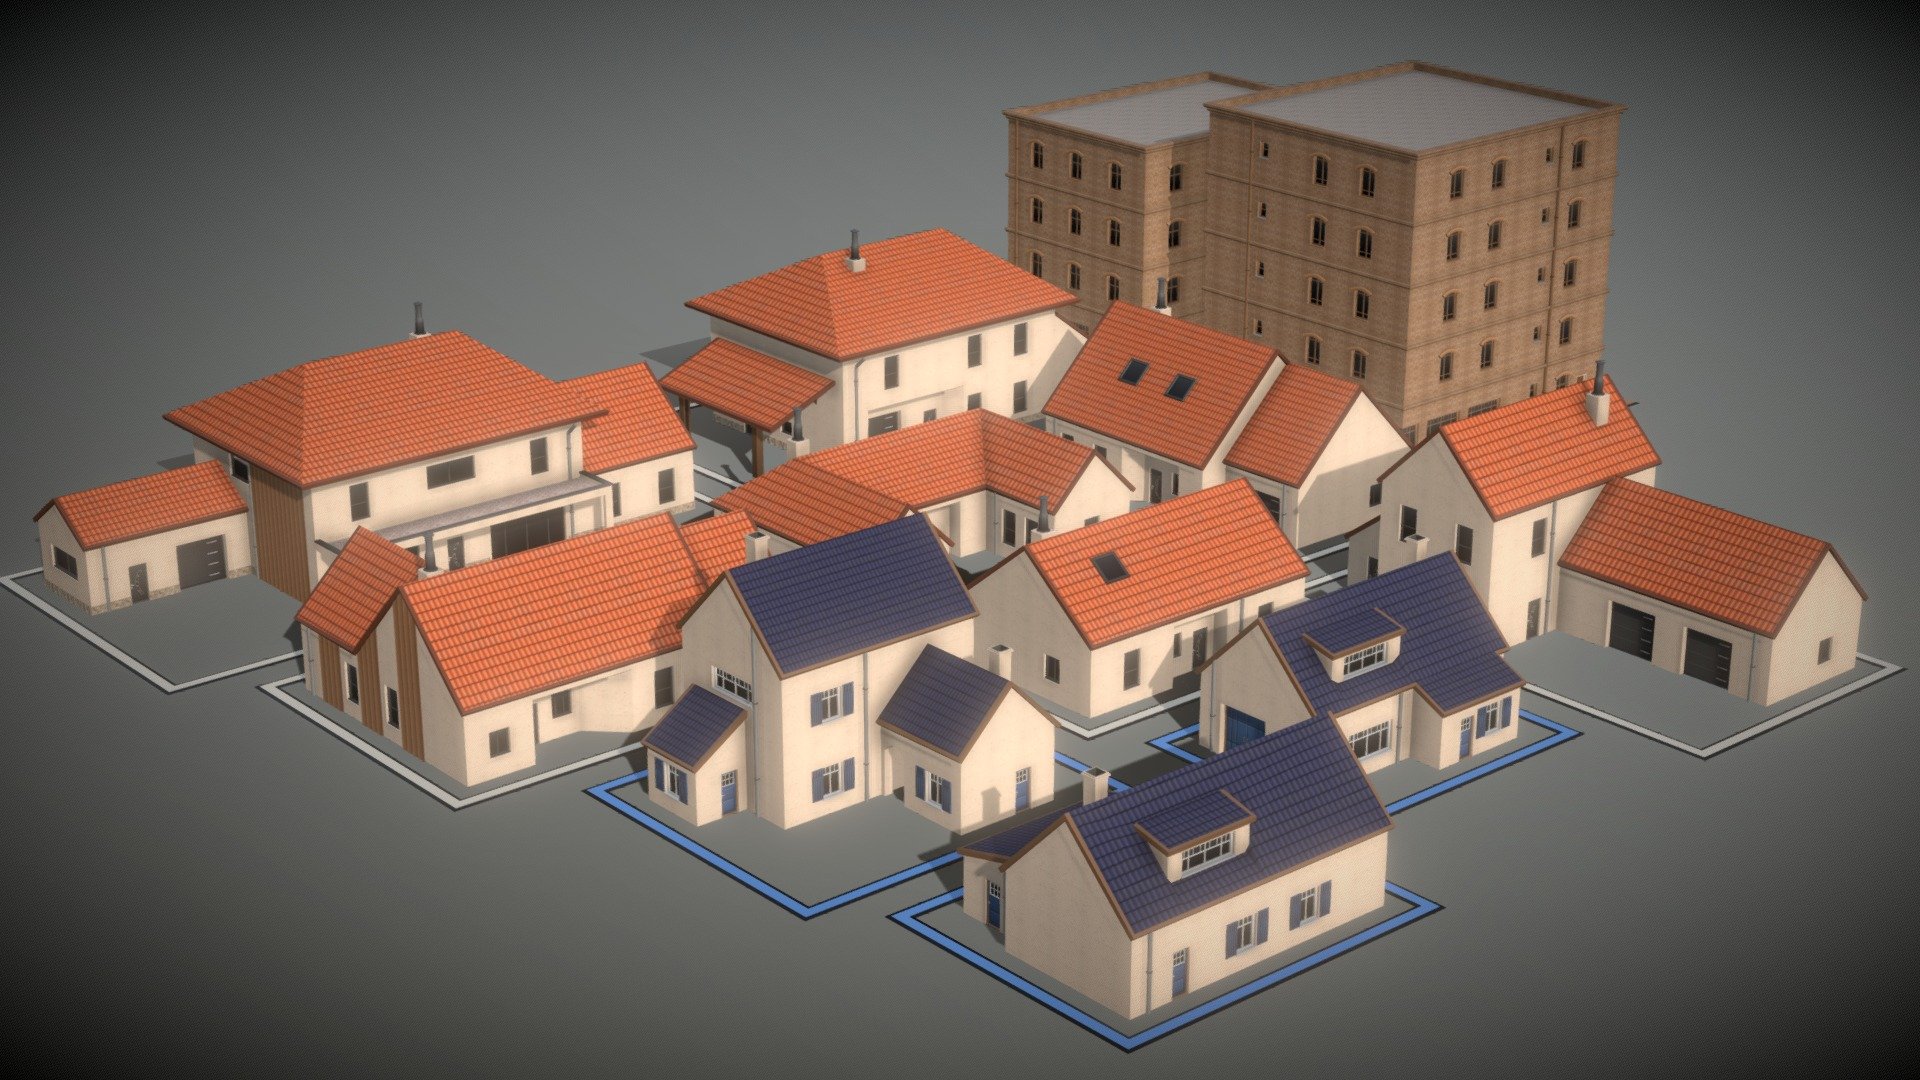 10 House without interior

2 Building without interior

Format model .obj 

Format texture .png

Contact (FR) : https://www.twitch.tv/islidetn

Last Update : 28 Sept. 23 - Pack - Low Poly - 12 Building - Download Free 3D model by Islide 3d model